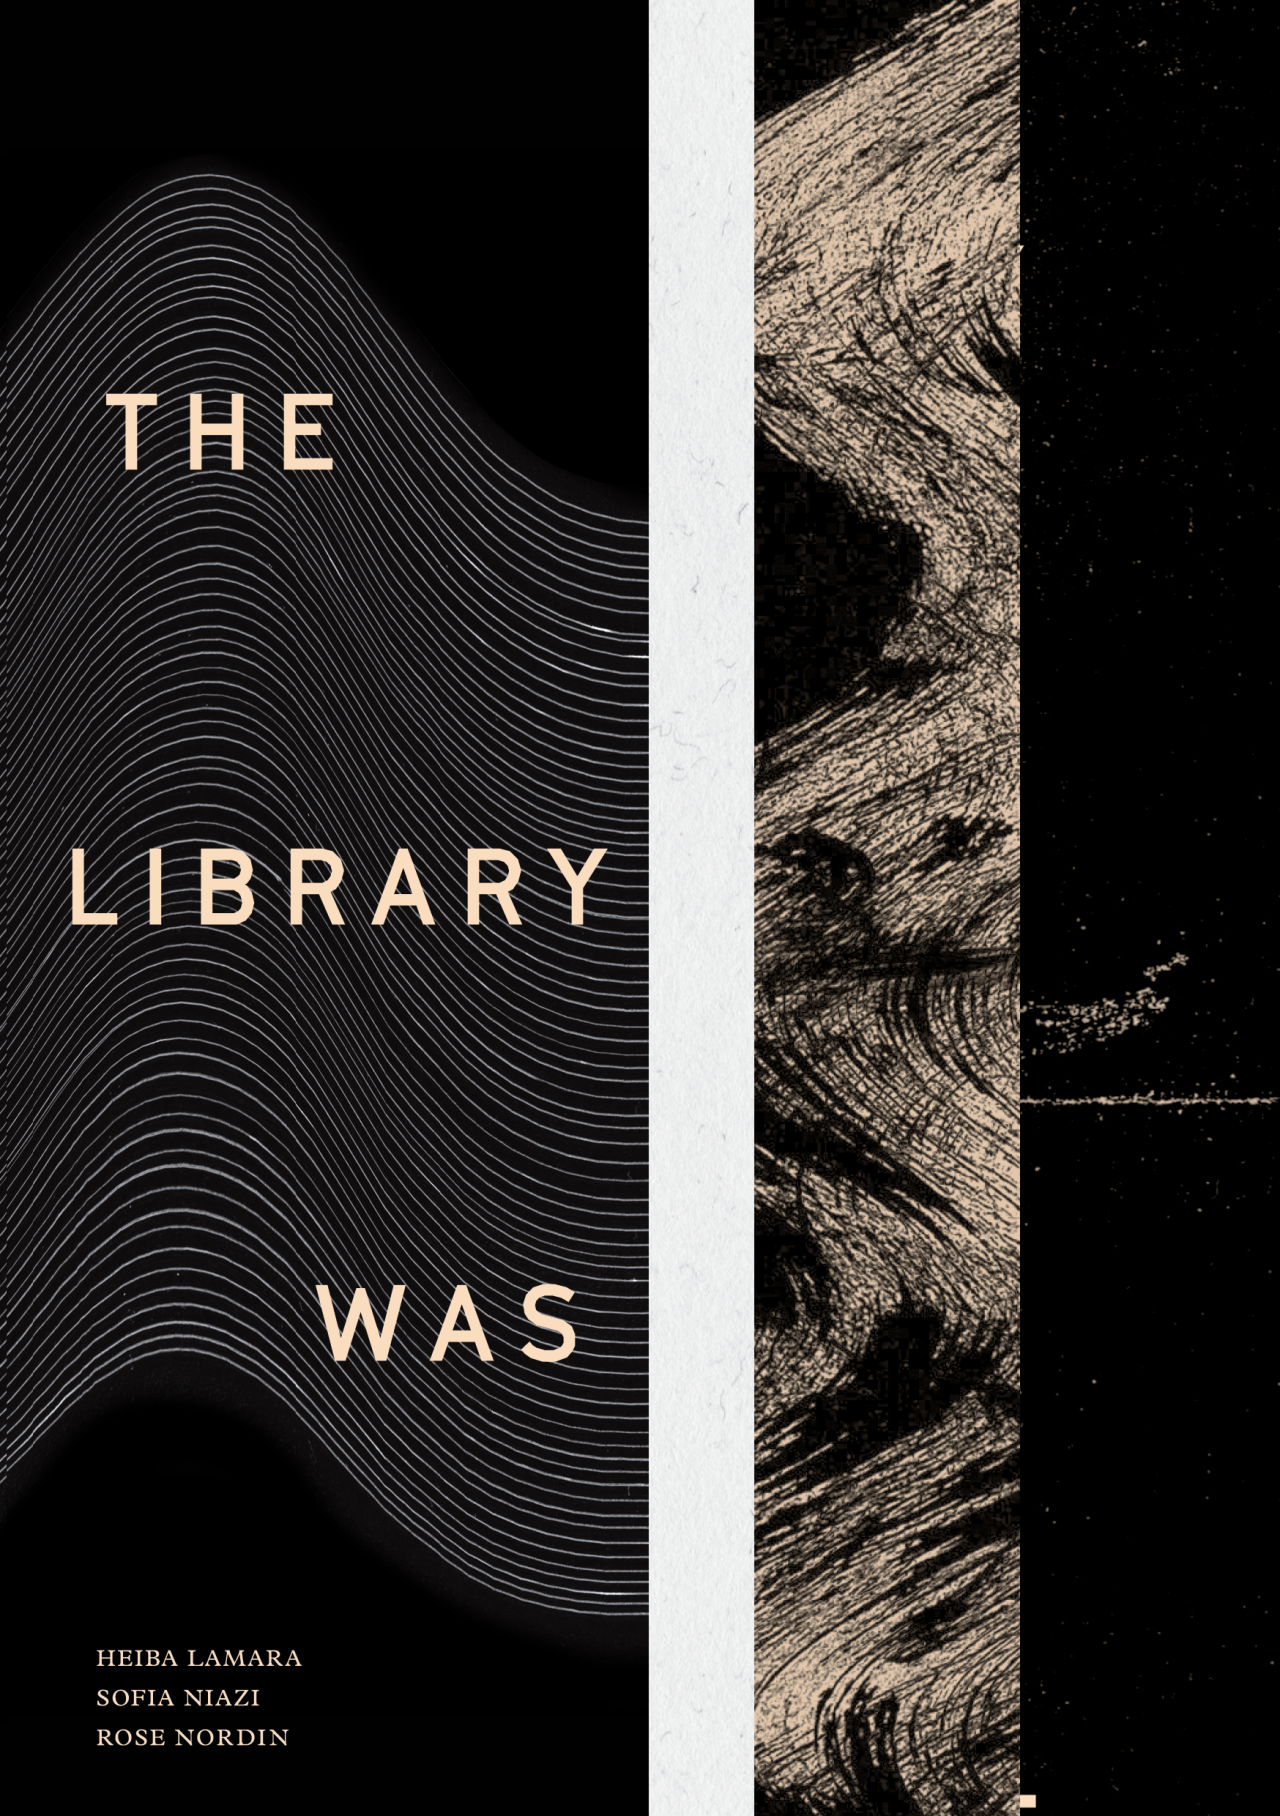 Very excited to announce that The Library Was, our first publication with Book Works, is now available for pre-order from our online shop 😬 very limited edition, hand crafted elements and superior quality...